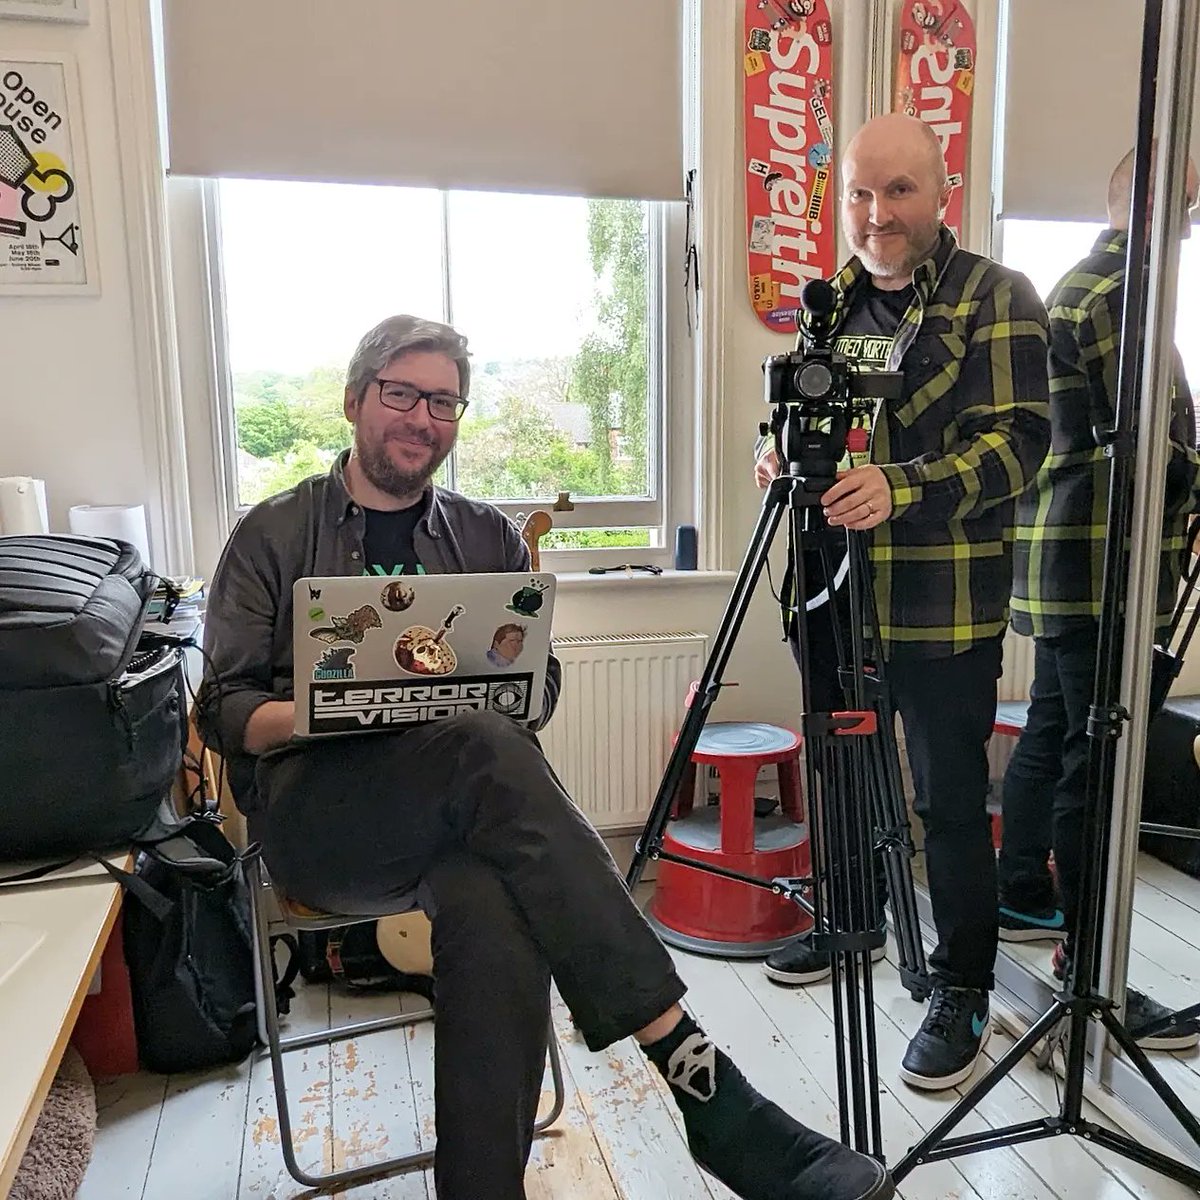 Interviewed for forthcoming doc about 80s TV nuke drama 'Threads' (I was an extra). Revisiting a teen trauma c/o @craigimann + @spectralfilms... thanks *a lot* guys! 😅